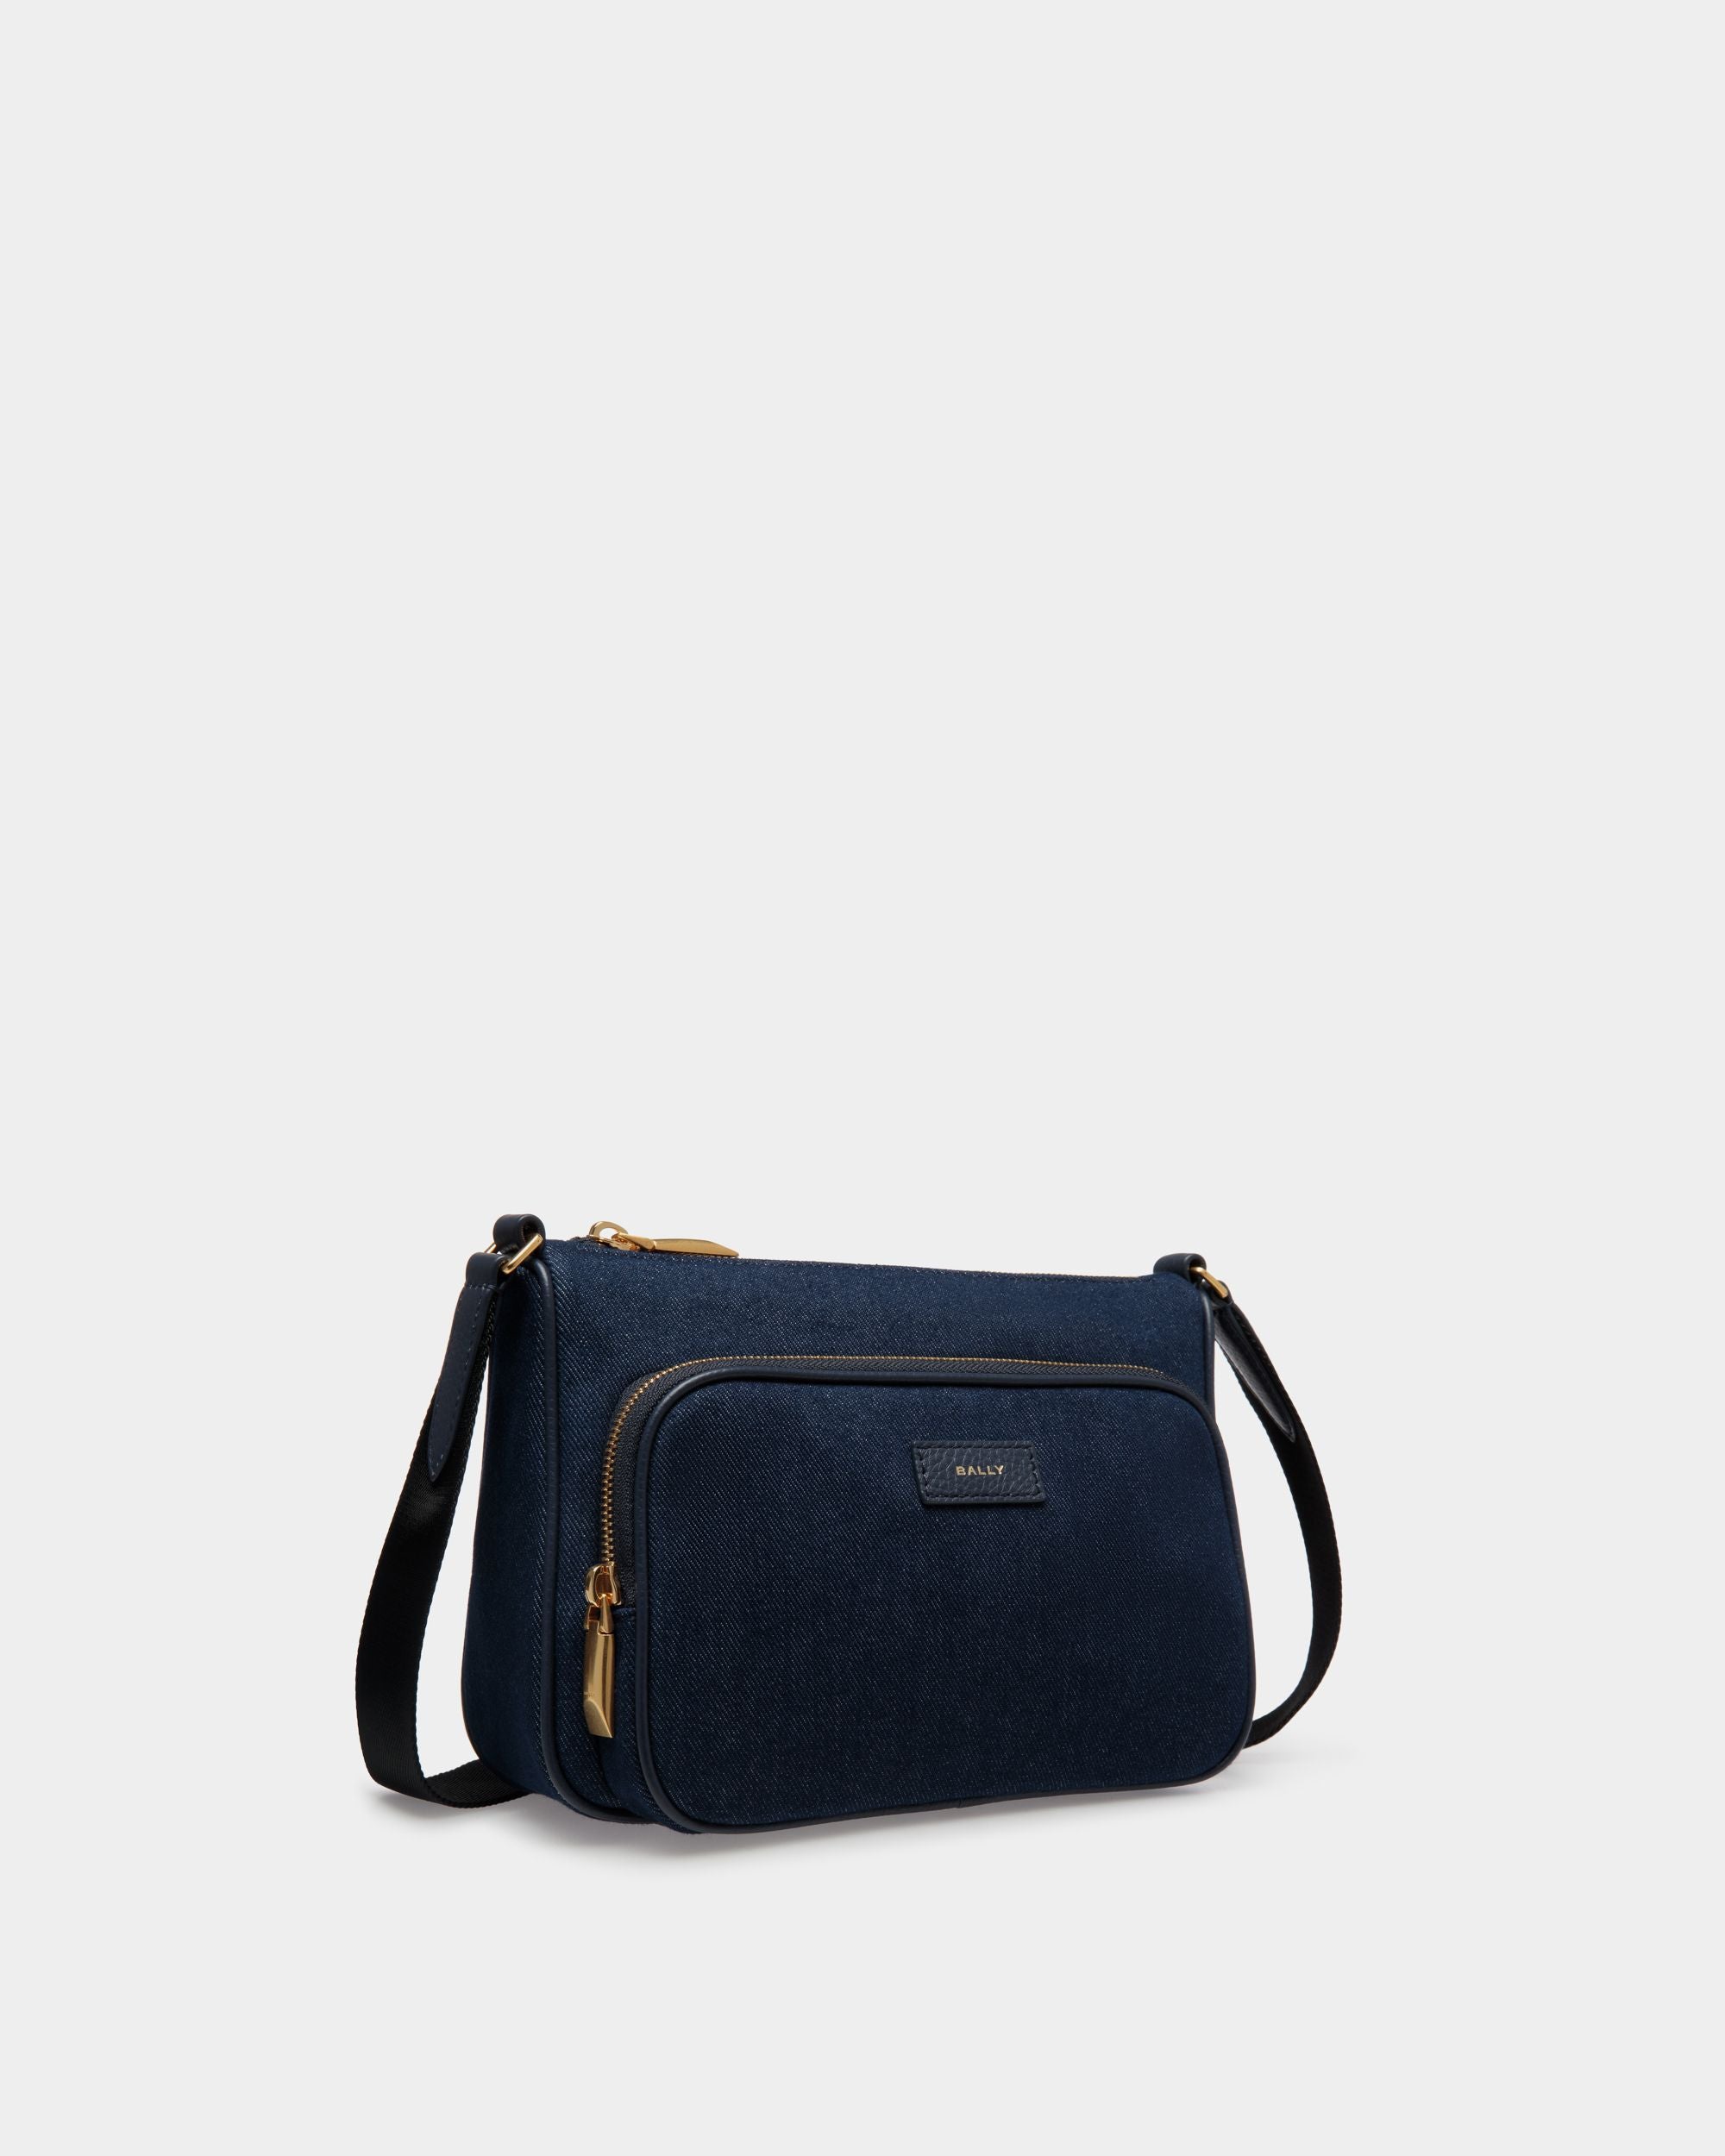 Bar | Men's Crossbody Bag in Blue Canvas And Leather | Bally | Still Life 3/4 Front